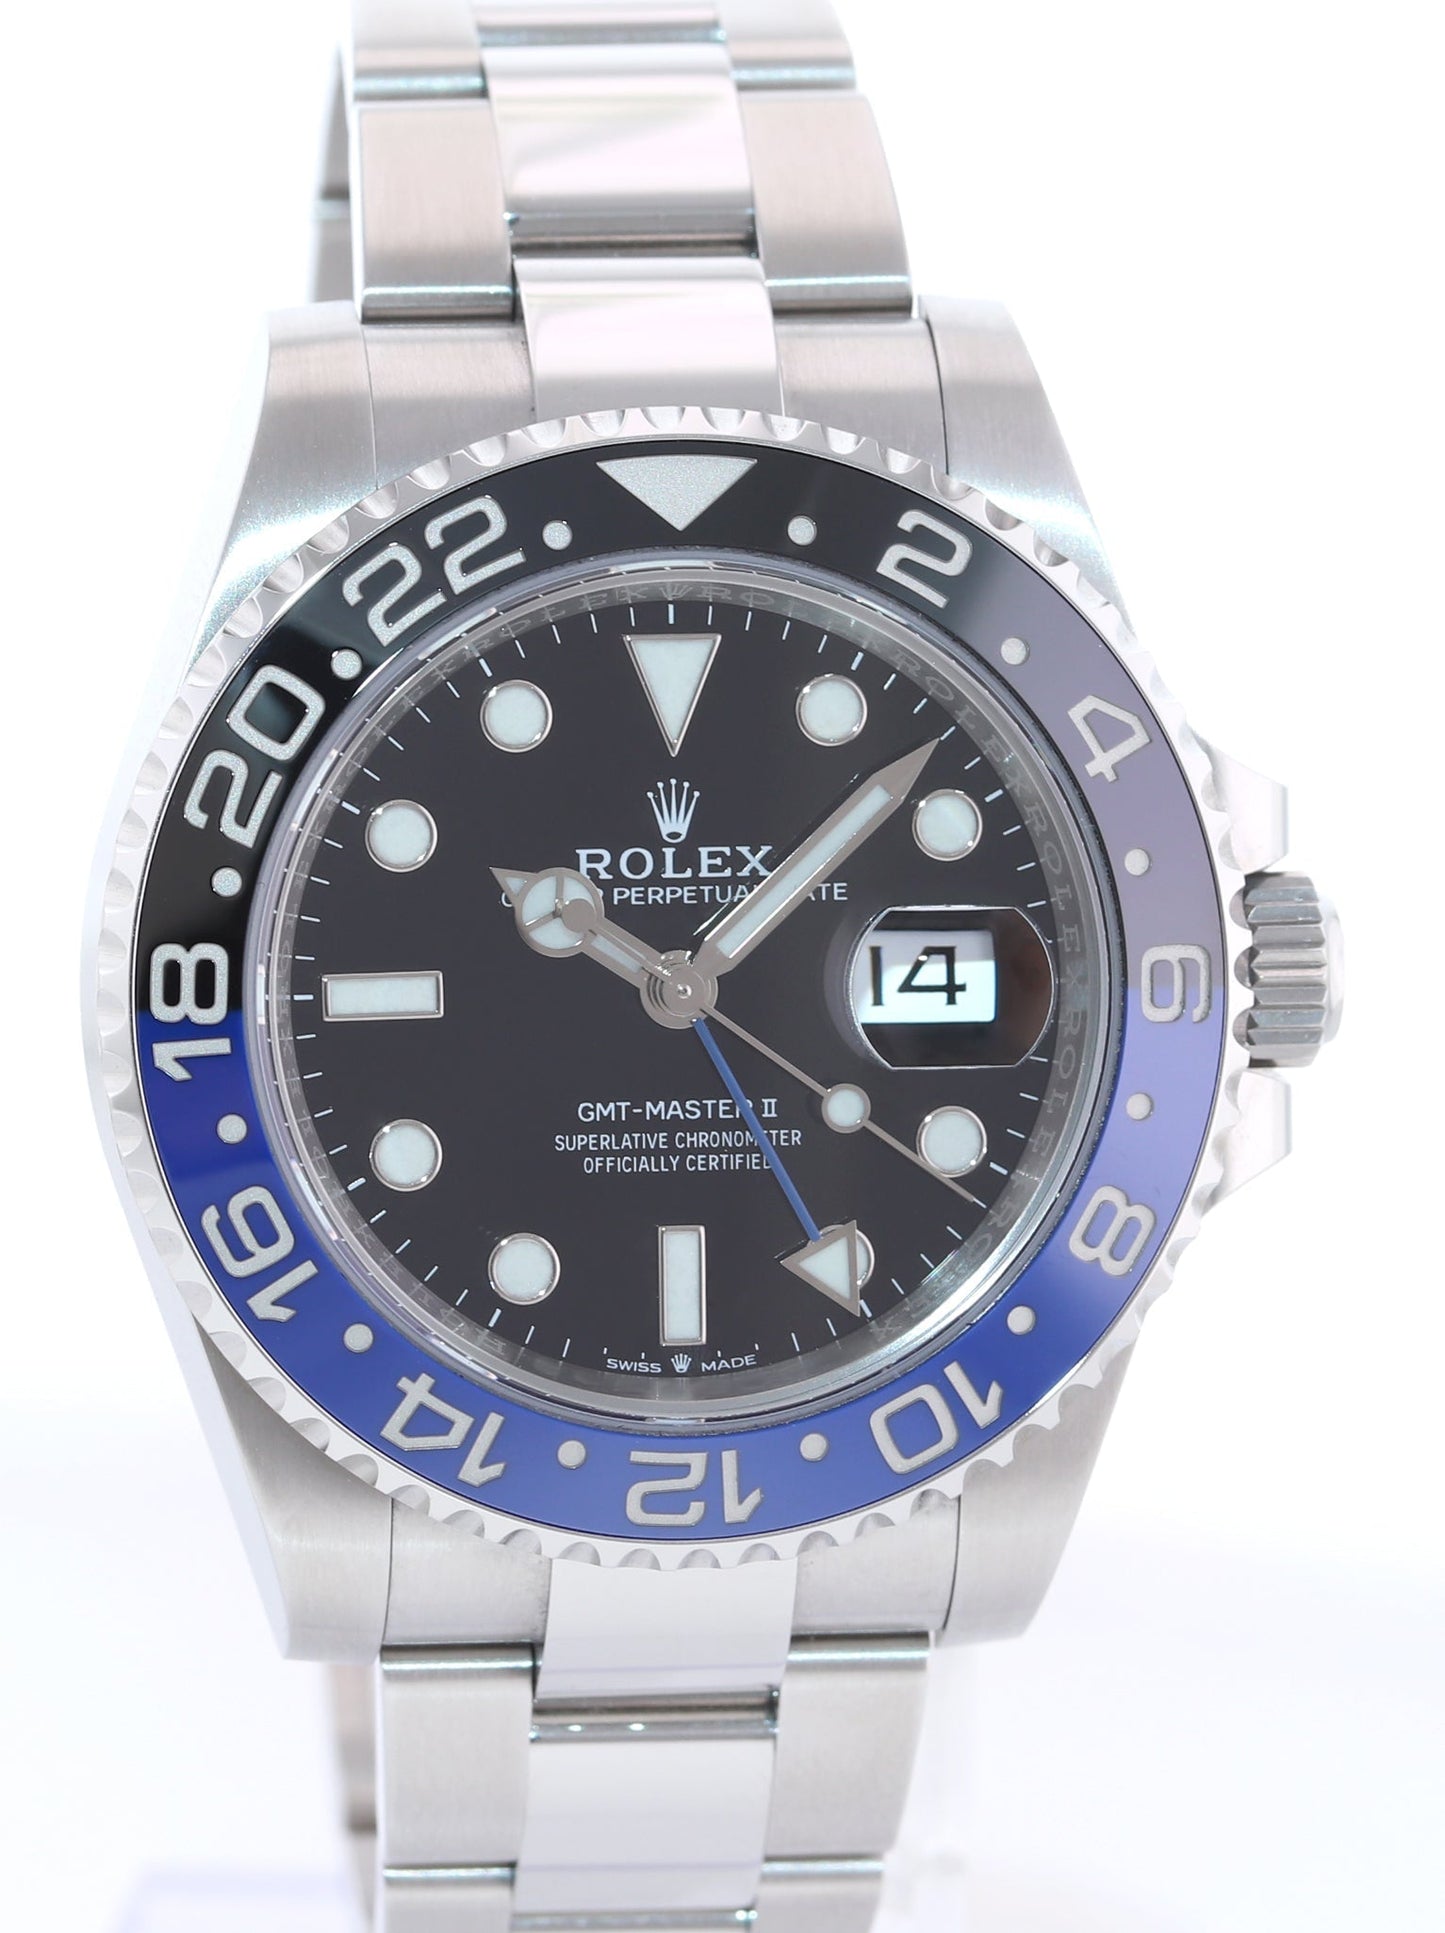 PAPERS 2021 NEW Rolex 126710 GMT Master Batman Black Blue Oyster Ceramic Watch